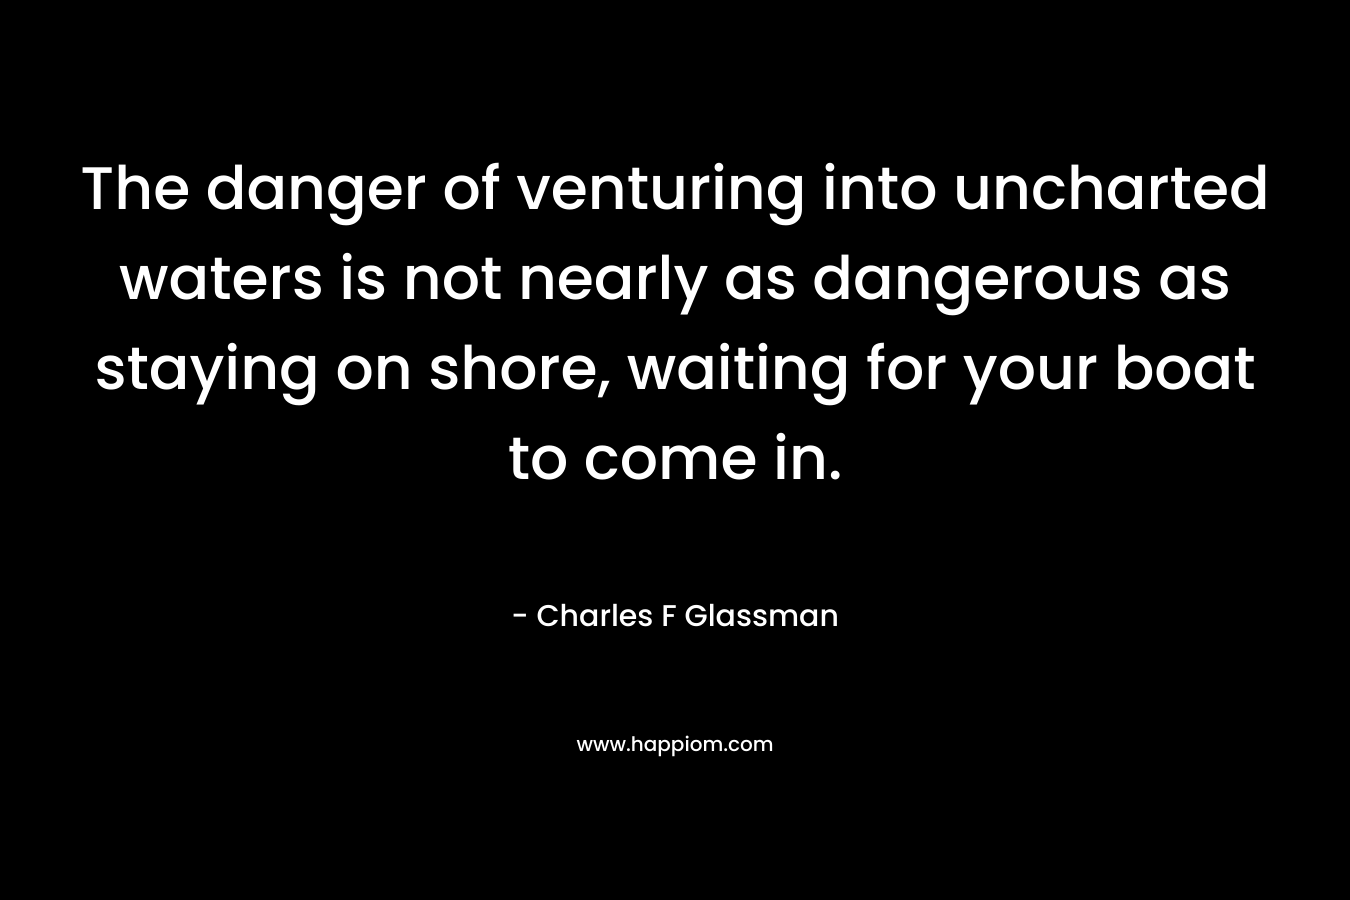 The danger of venturing into uncharted waters is not nearly as dangerous as staying on shore, waiting for your boat to come in. – Charles F Glassman